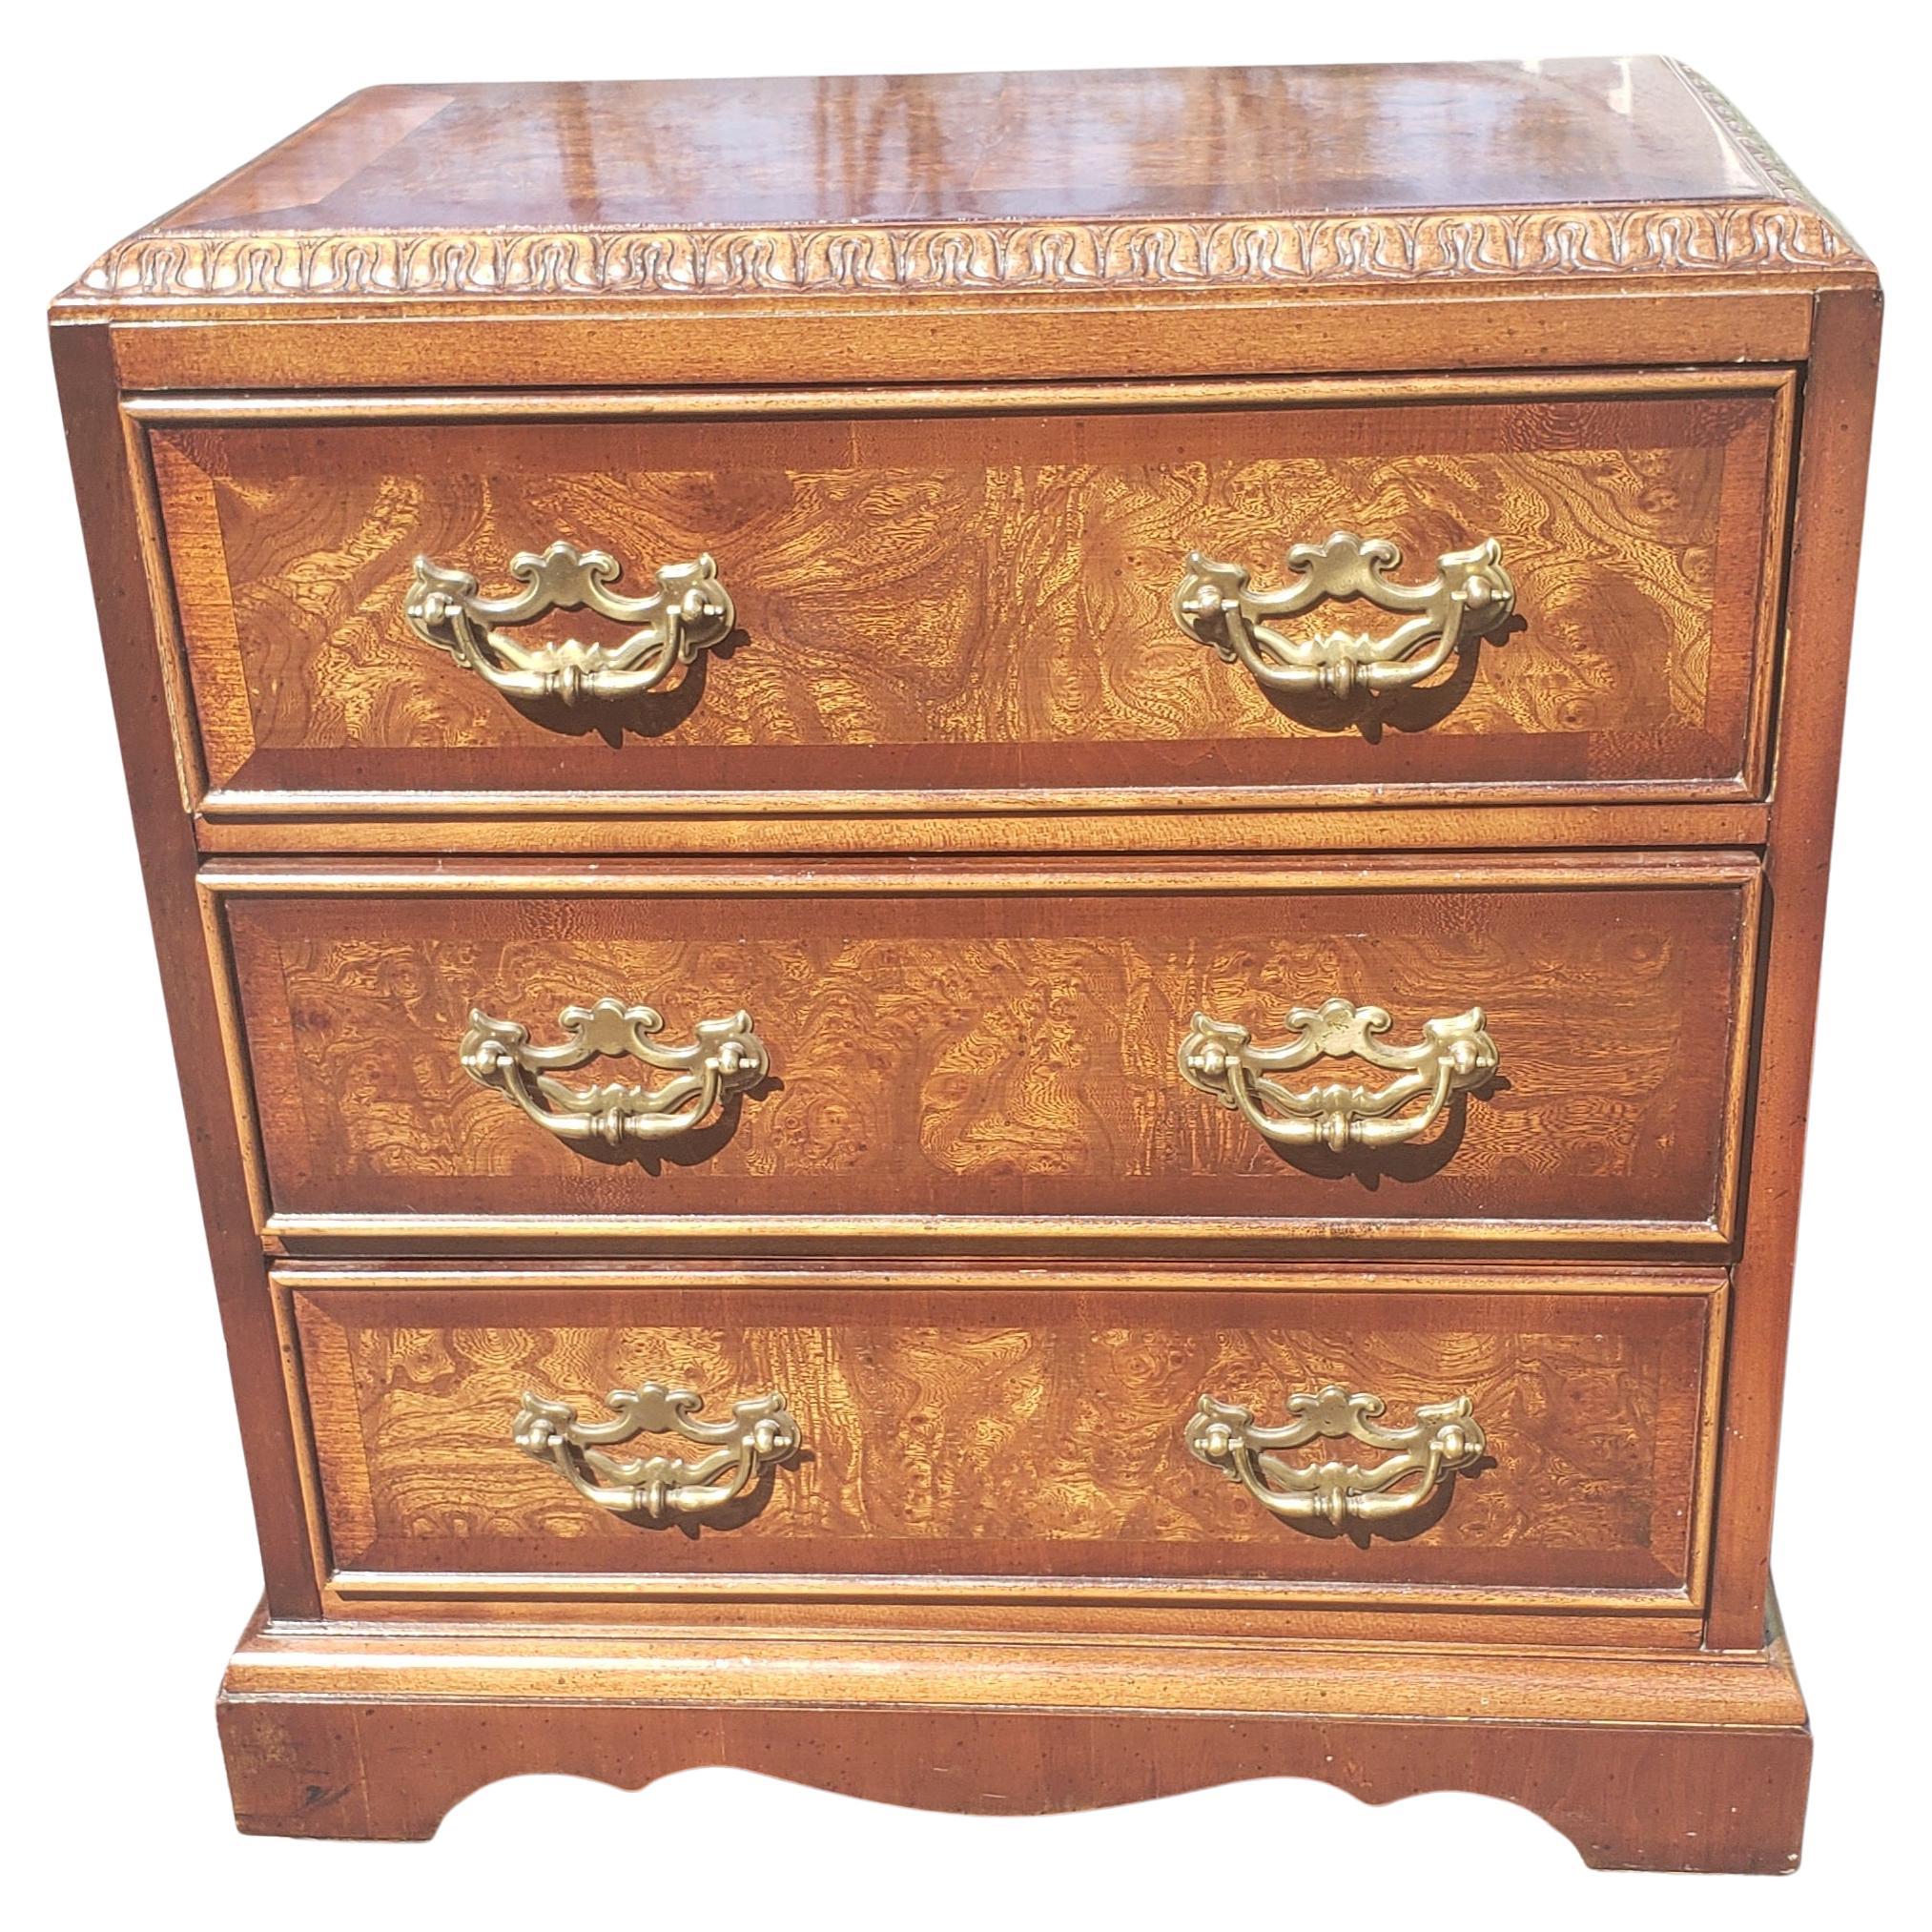 Amazing Lane Earl's Court Collection Burl and Banded Mahogany Bedside Chest in very good vintage condition. 
Burl mahogany banded top surrounded by exquisite carvings around the top edges. Original Chippendale hardware. Side handles. 
Minor signs of